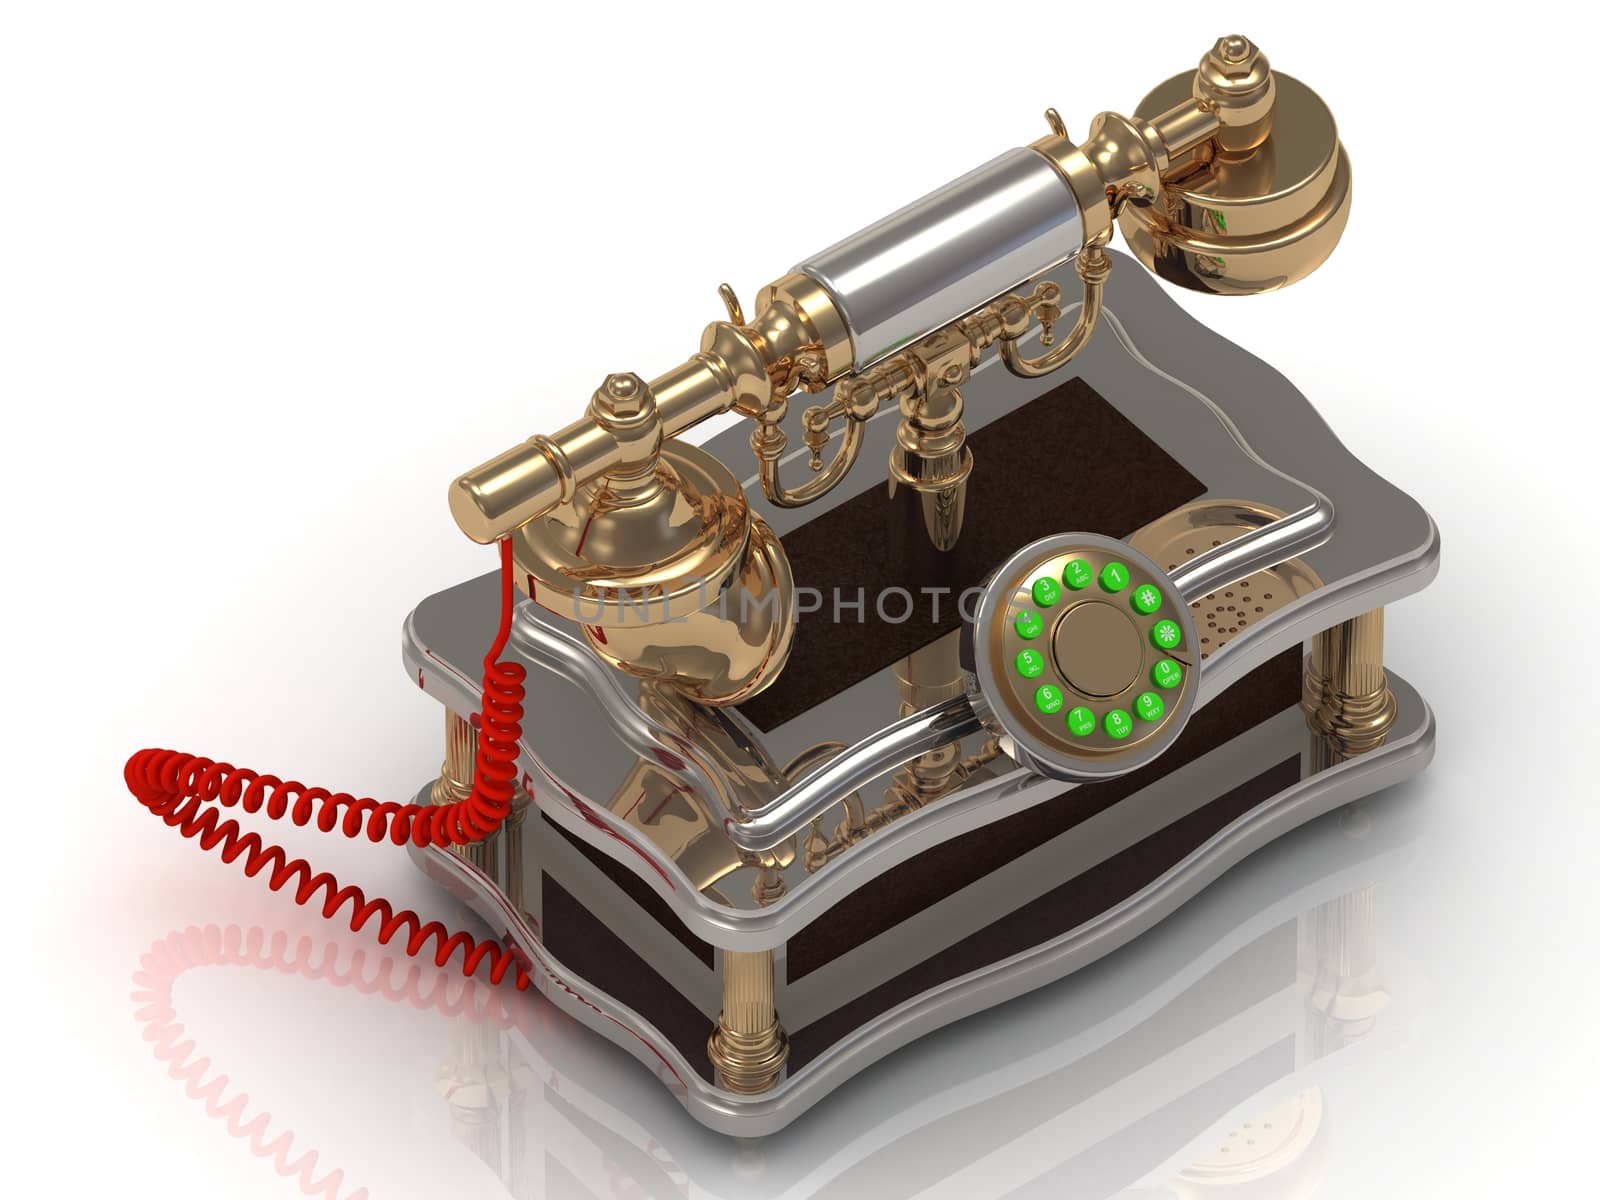 Vintage old telephone with binoculars conceptual still life on white background